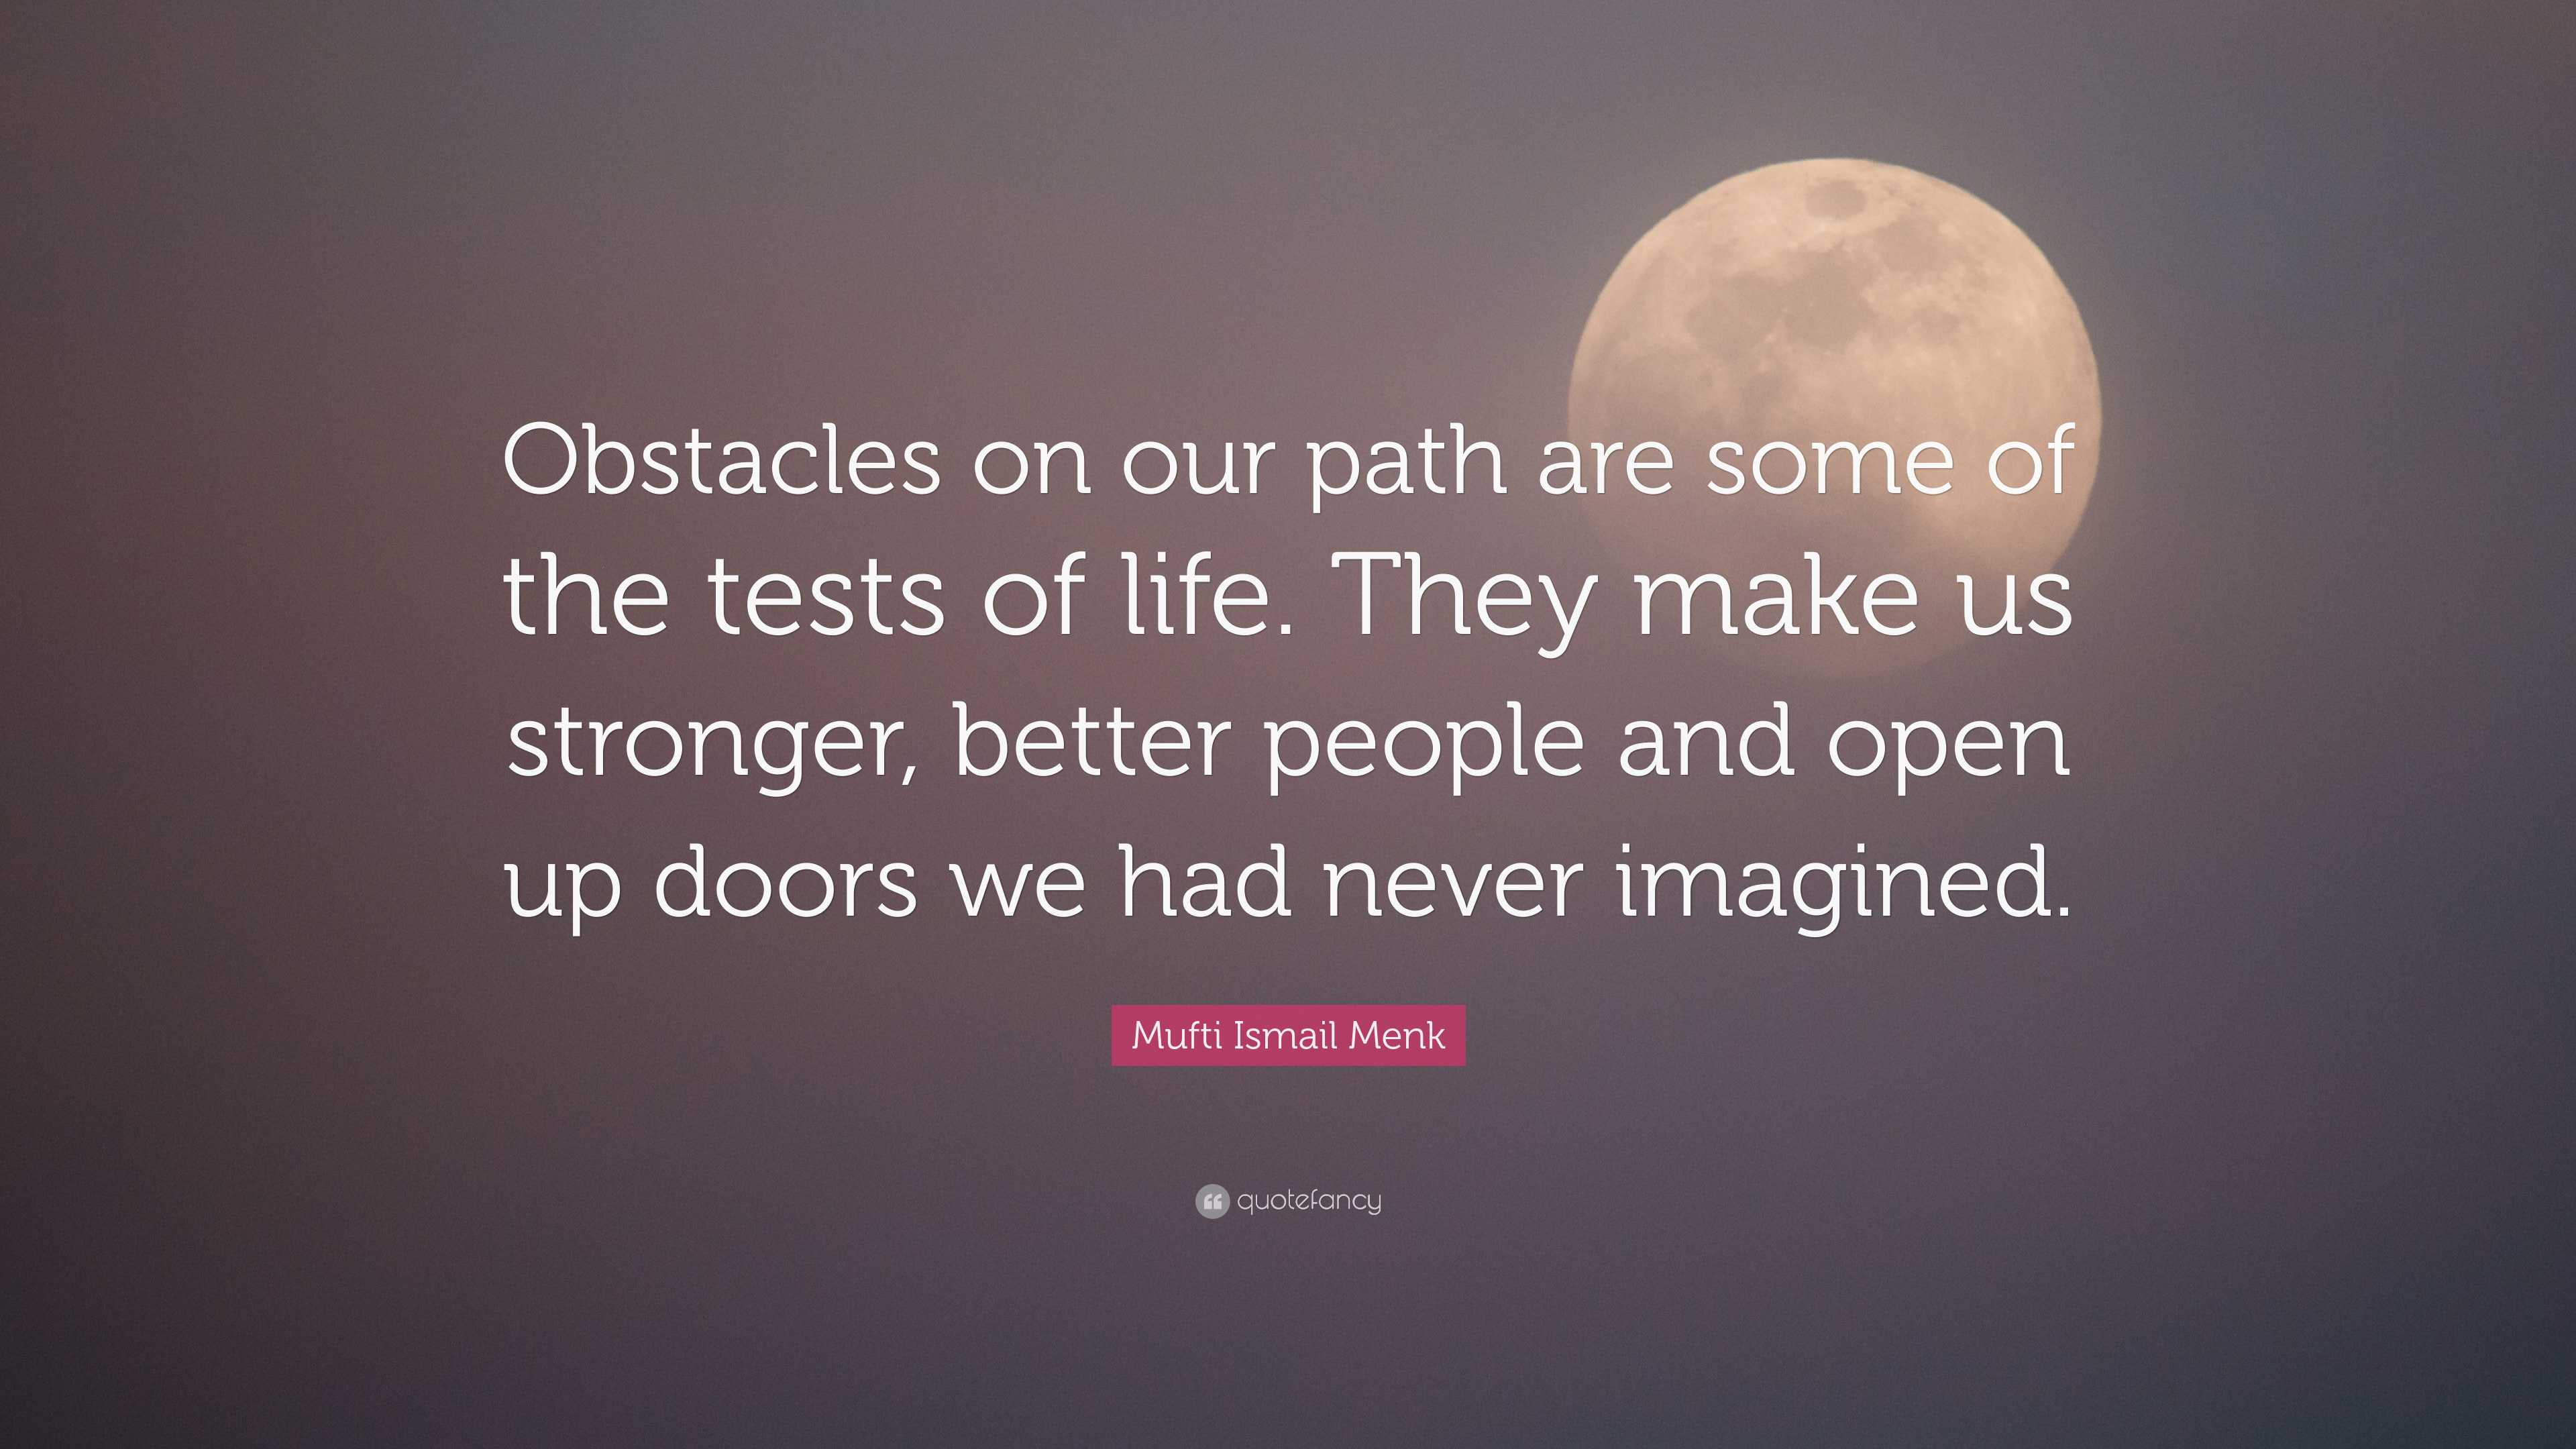 Mufti Ismail Menk Quote: “Obstacles on our path are some of the tests ...